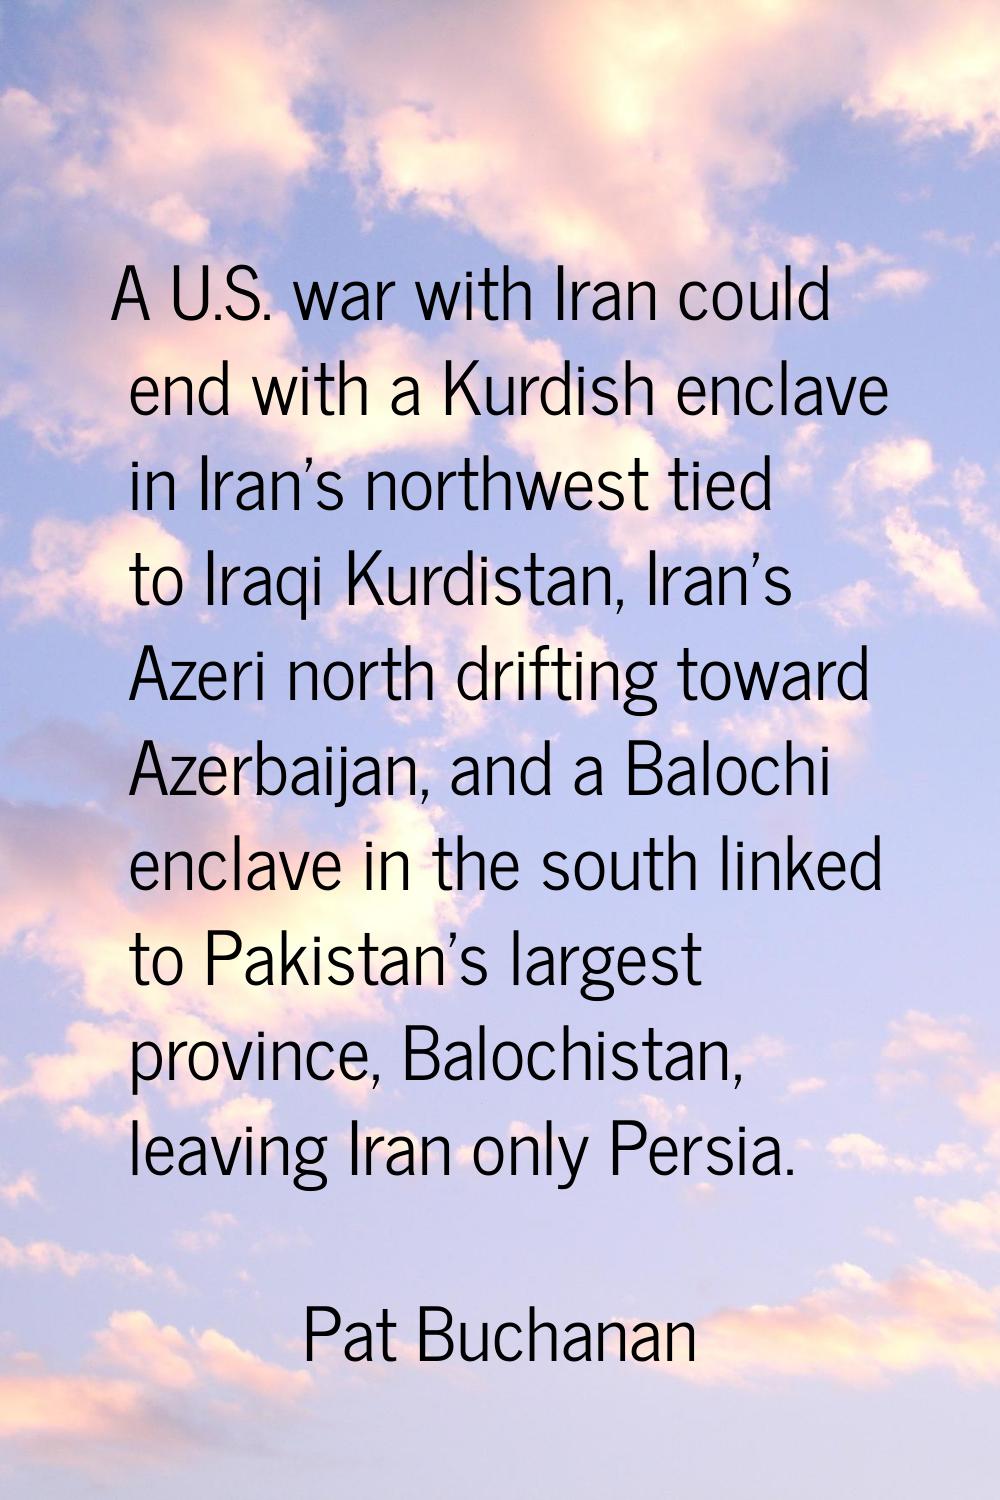 A U.S. war with Iran could end with a Kurdish enclave in Iran's northwest tied to Iraqi Kurdistan, 